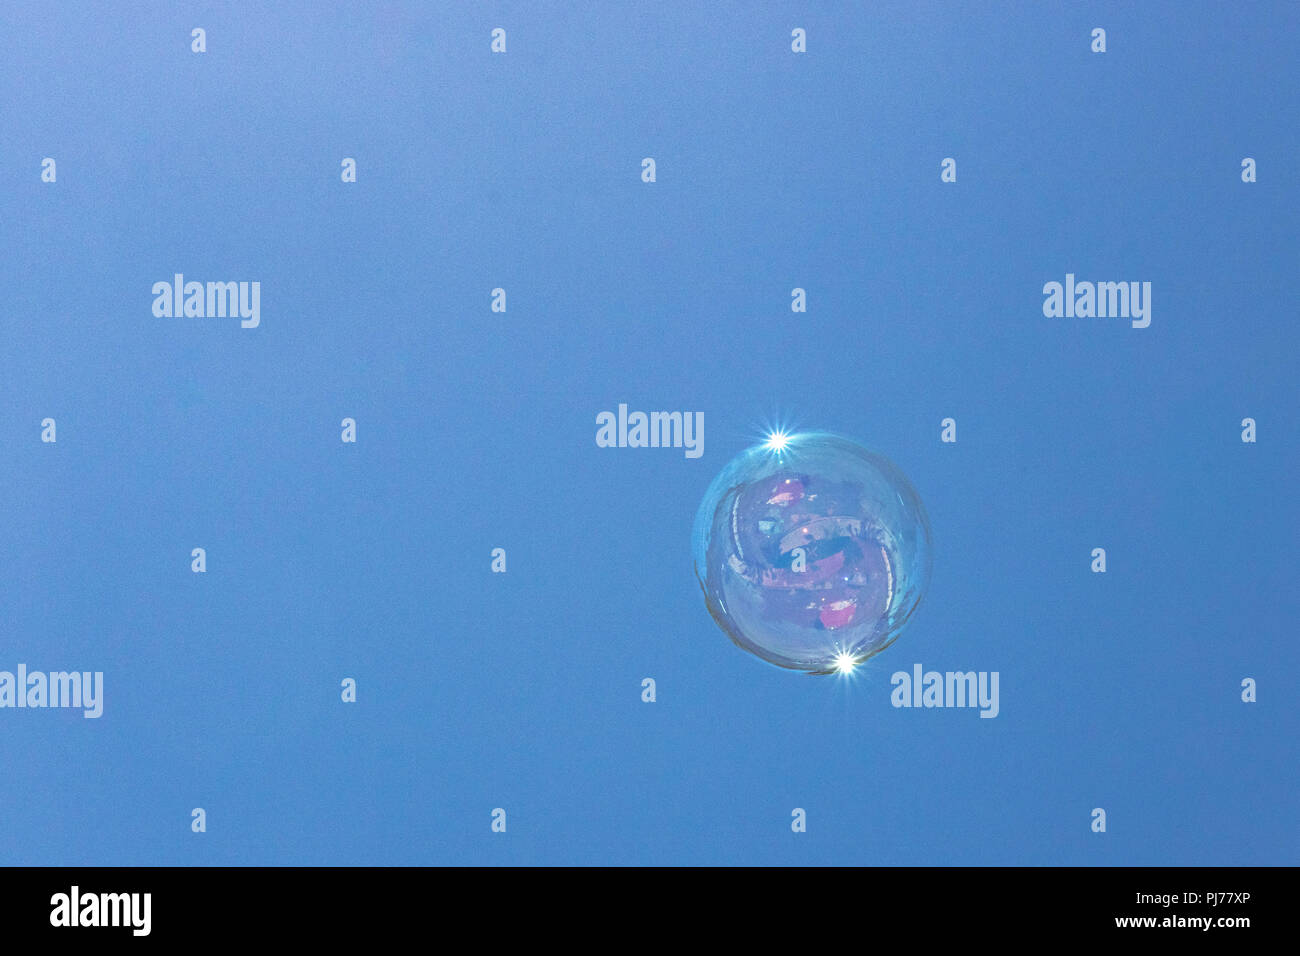 Closeup of single bubble floating in background of blue sky with reflections in bubble Stock Photo